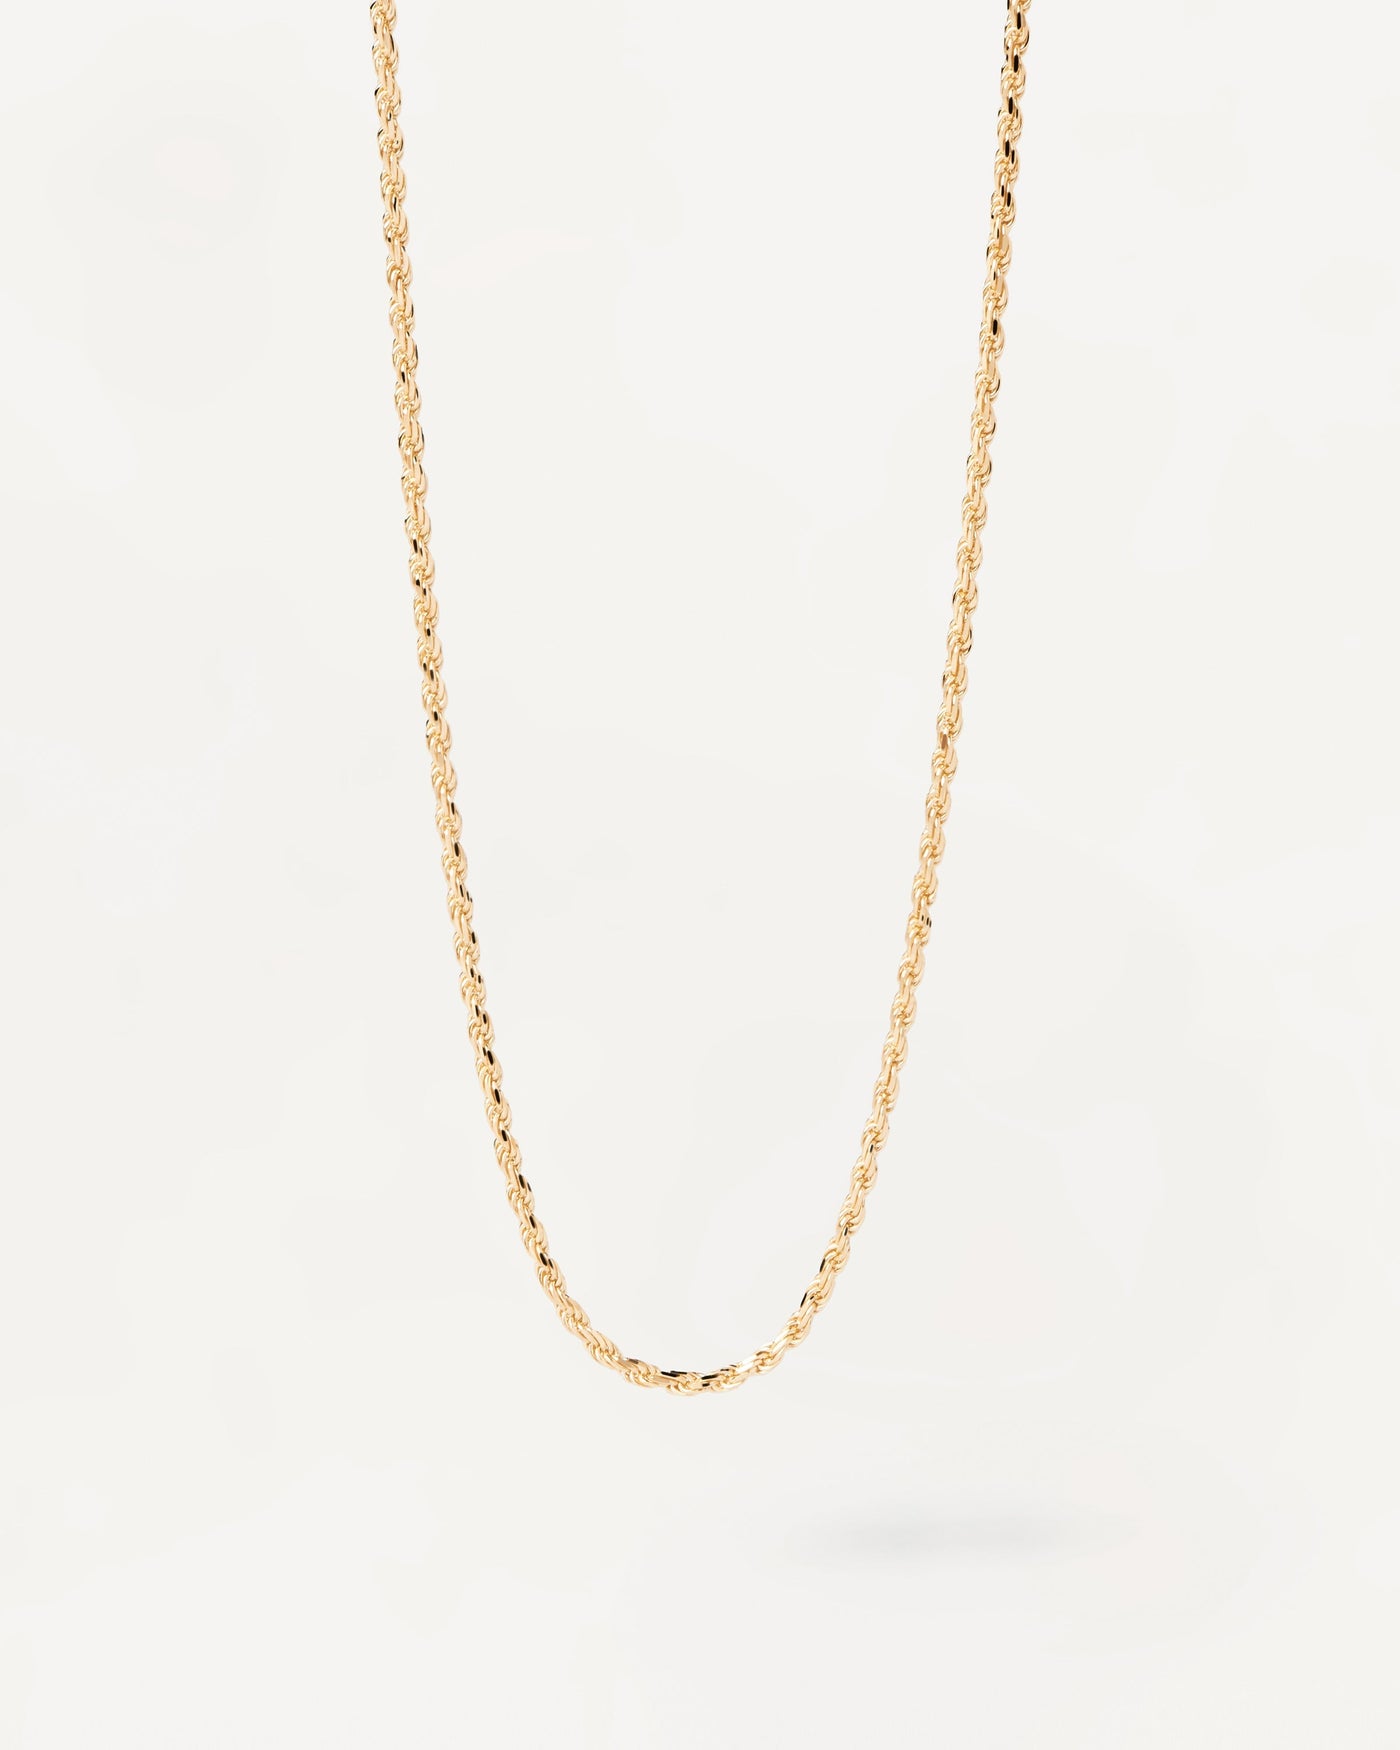 2023 Selection | Gold Rope Chain Necklace. 18K solid yellow gold chain necklace with rope links. Get the latest arrival from PDPAOLA. Place your order safely and get this Best Seller. Free Shipping.